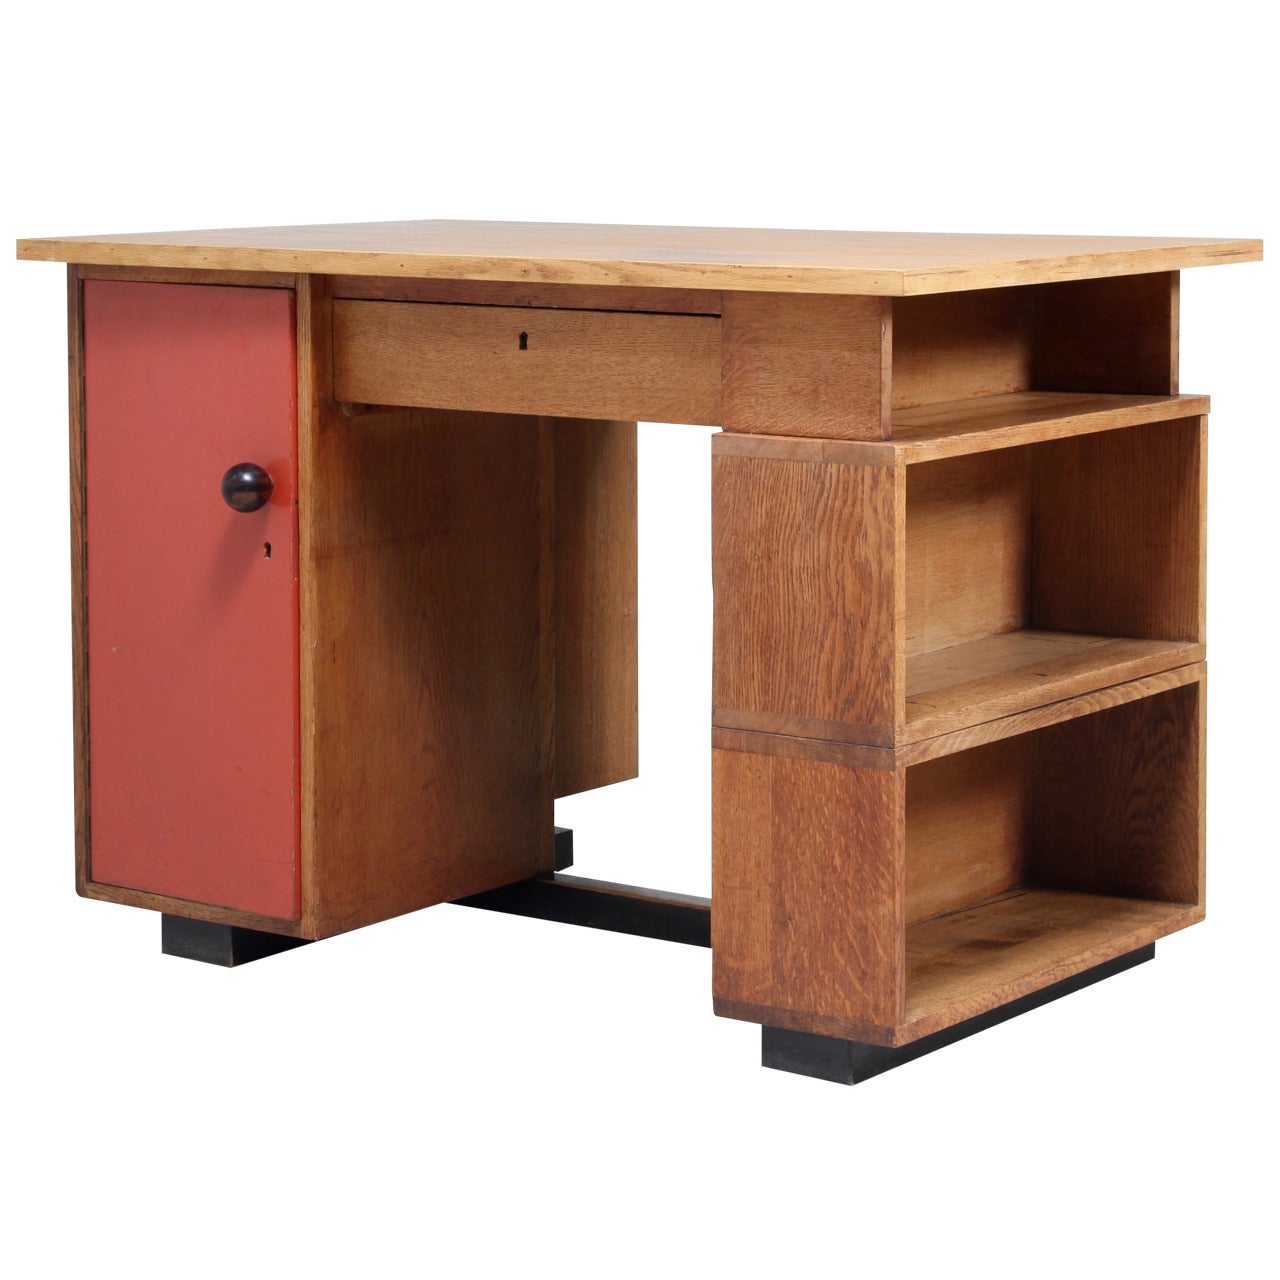 Rare 1920s Desk by Muntendam for LOV Oosterbeek For Sale